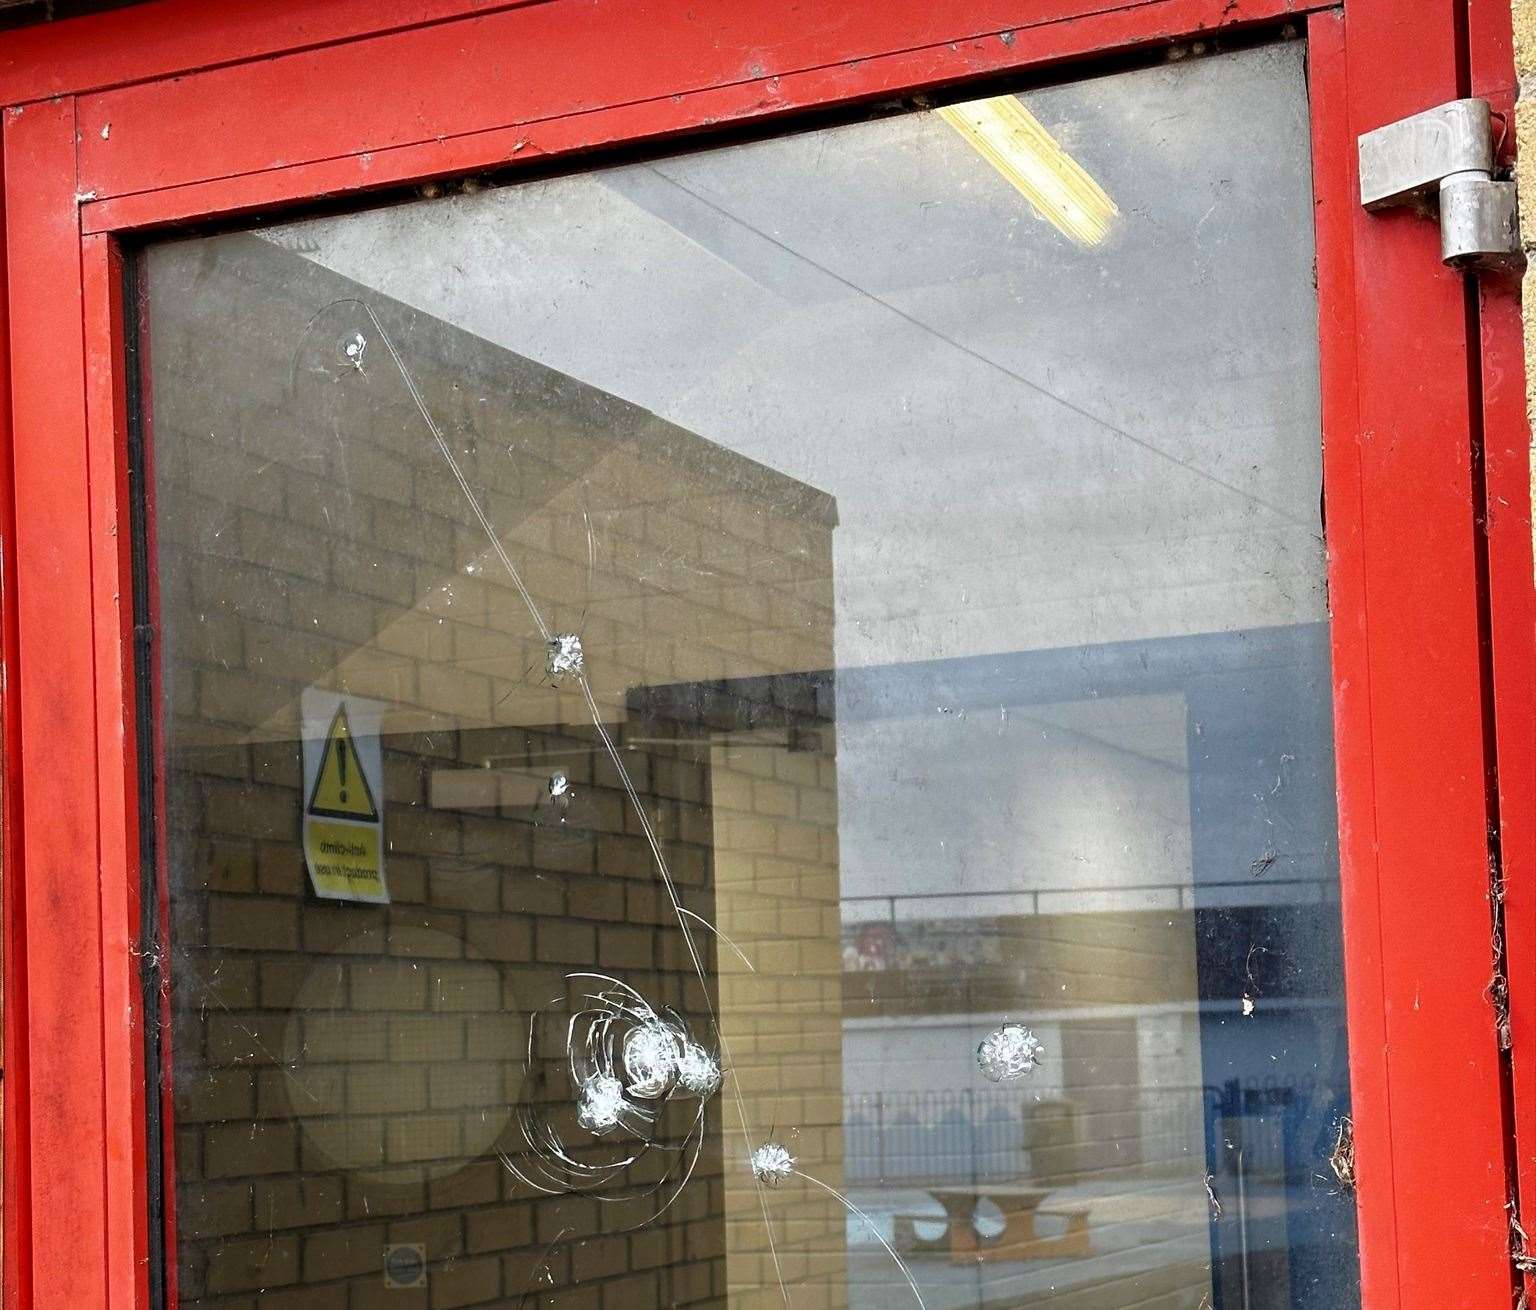 One of the property's doors was smashed by thugs overnight. Picture: Sheppey Leisure Complex